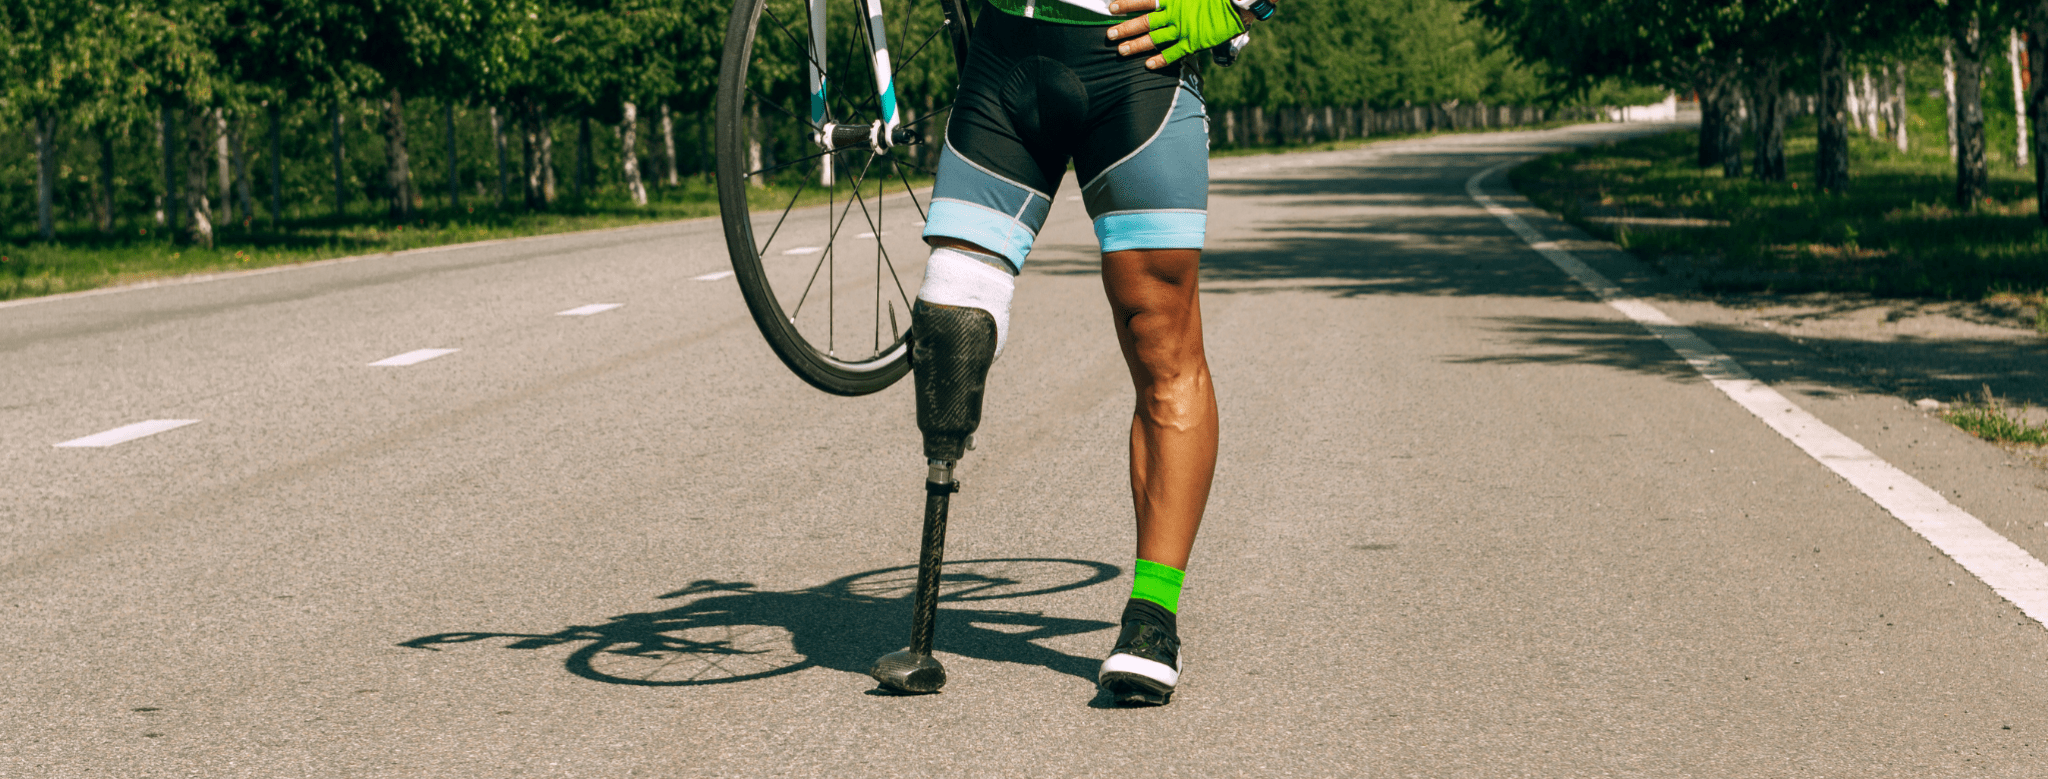 male with a prosthetic right leg holding a bicycle